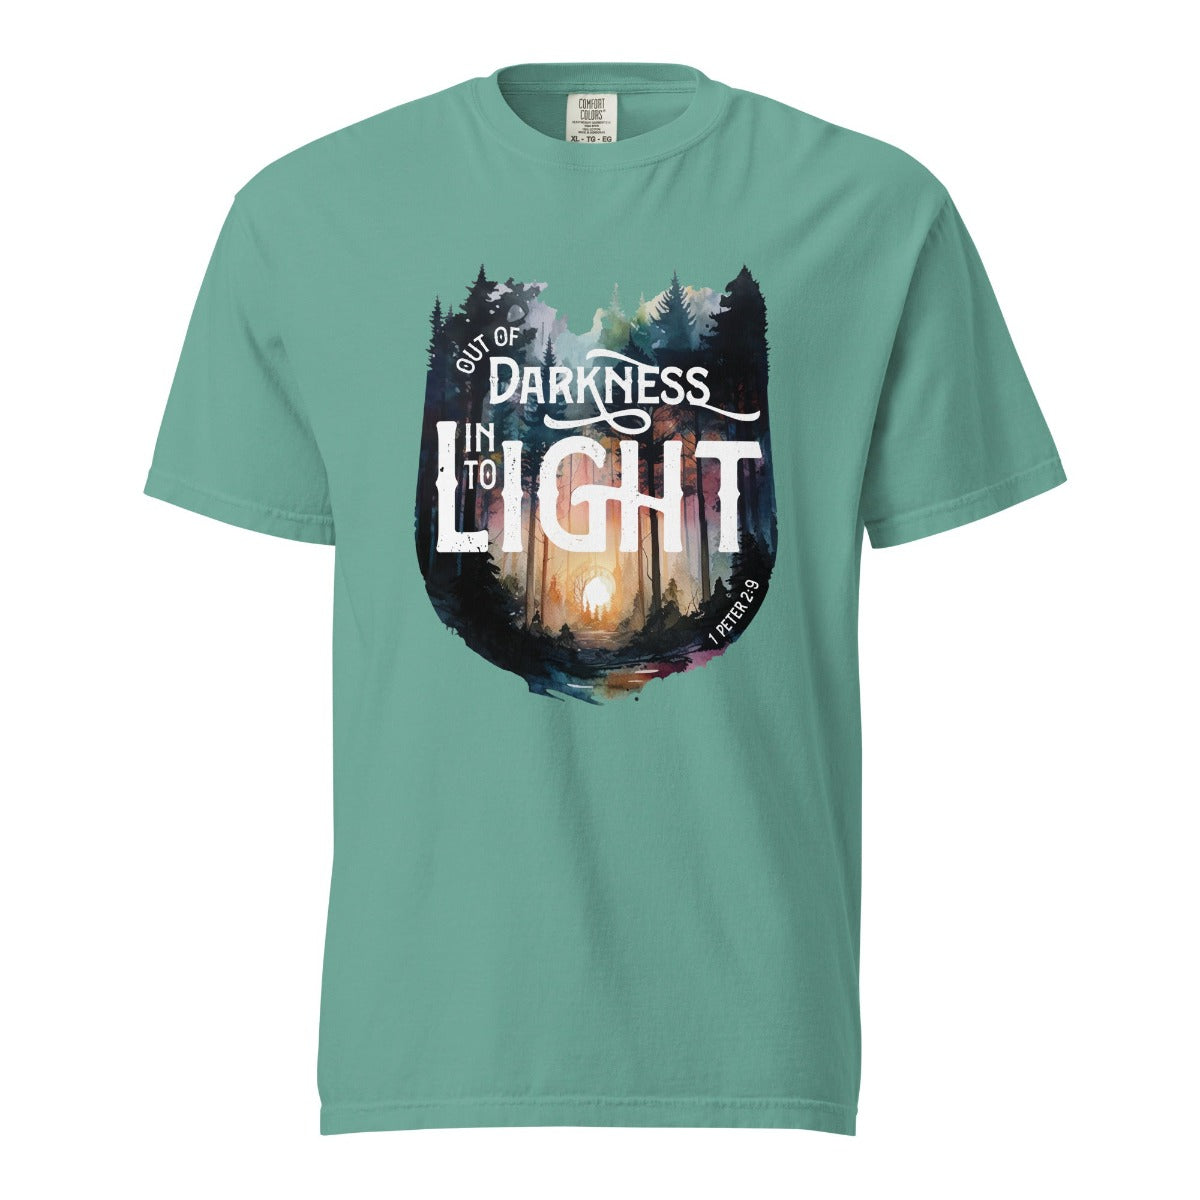 Seafoam bright teal color garment dyed Comfort Colors C1717 unisex faith-based Christian t-shirt with "Out of Darkness, Into Light" 1 Peter 2:9 bible verse and watercolor moody forest trees outdoor scene, designed for men and women